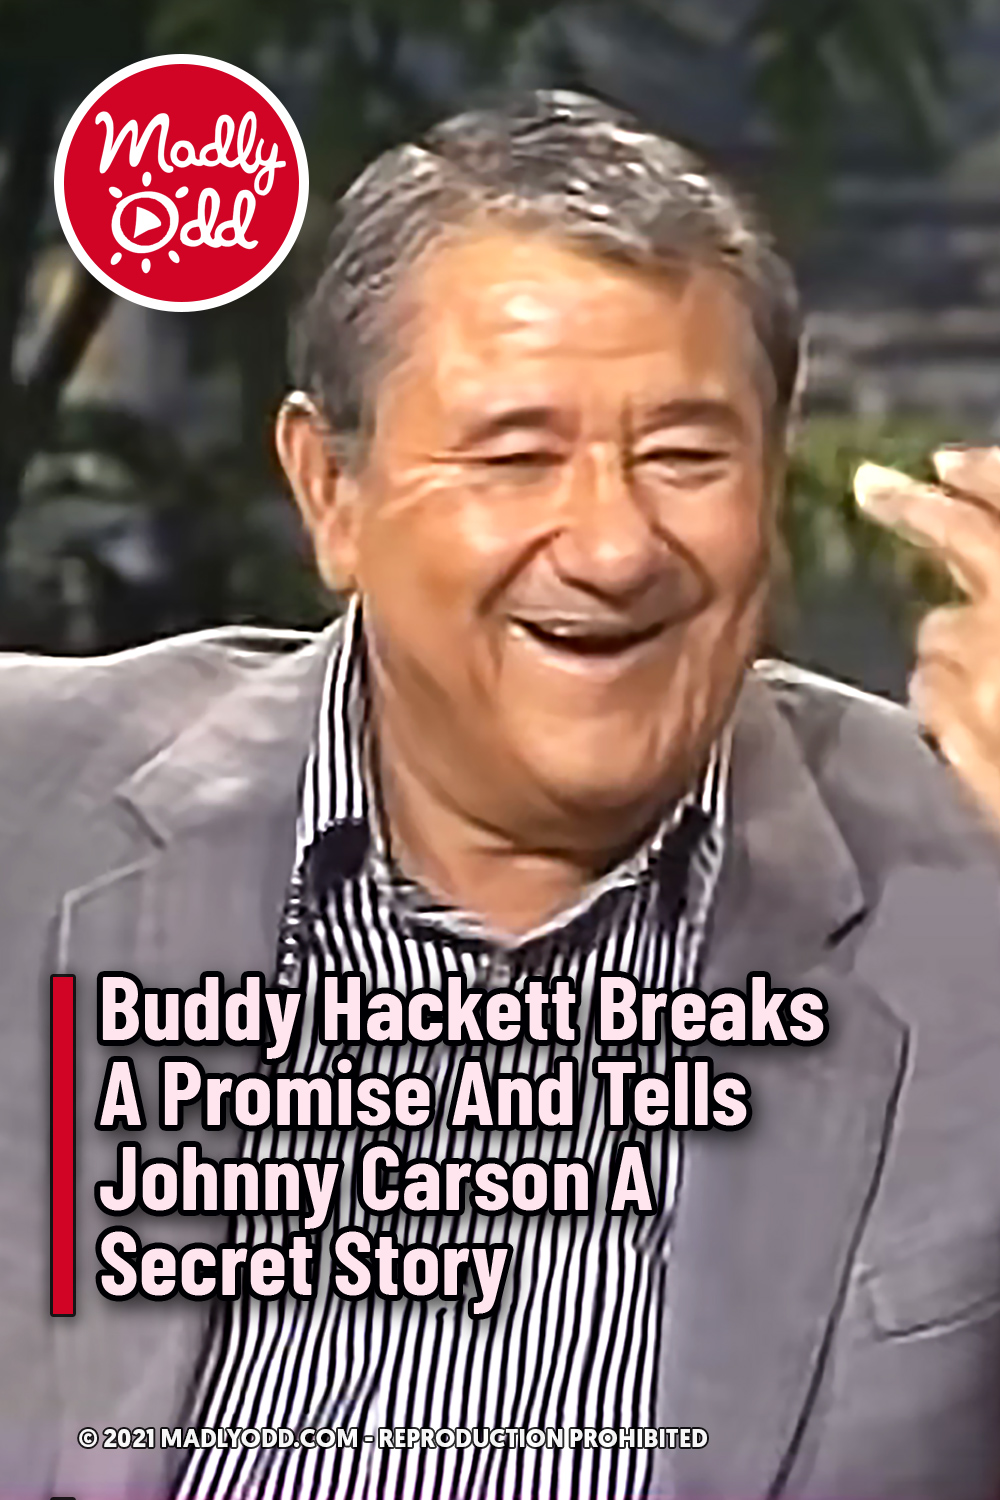 Buddy Hackett Breaks A Promise And Tells Johnny Carson A Secret Story